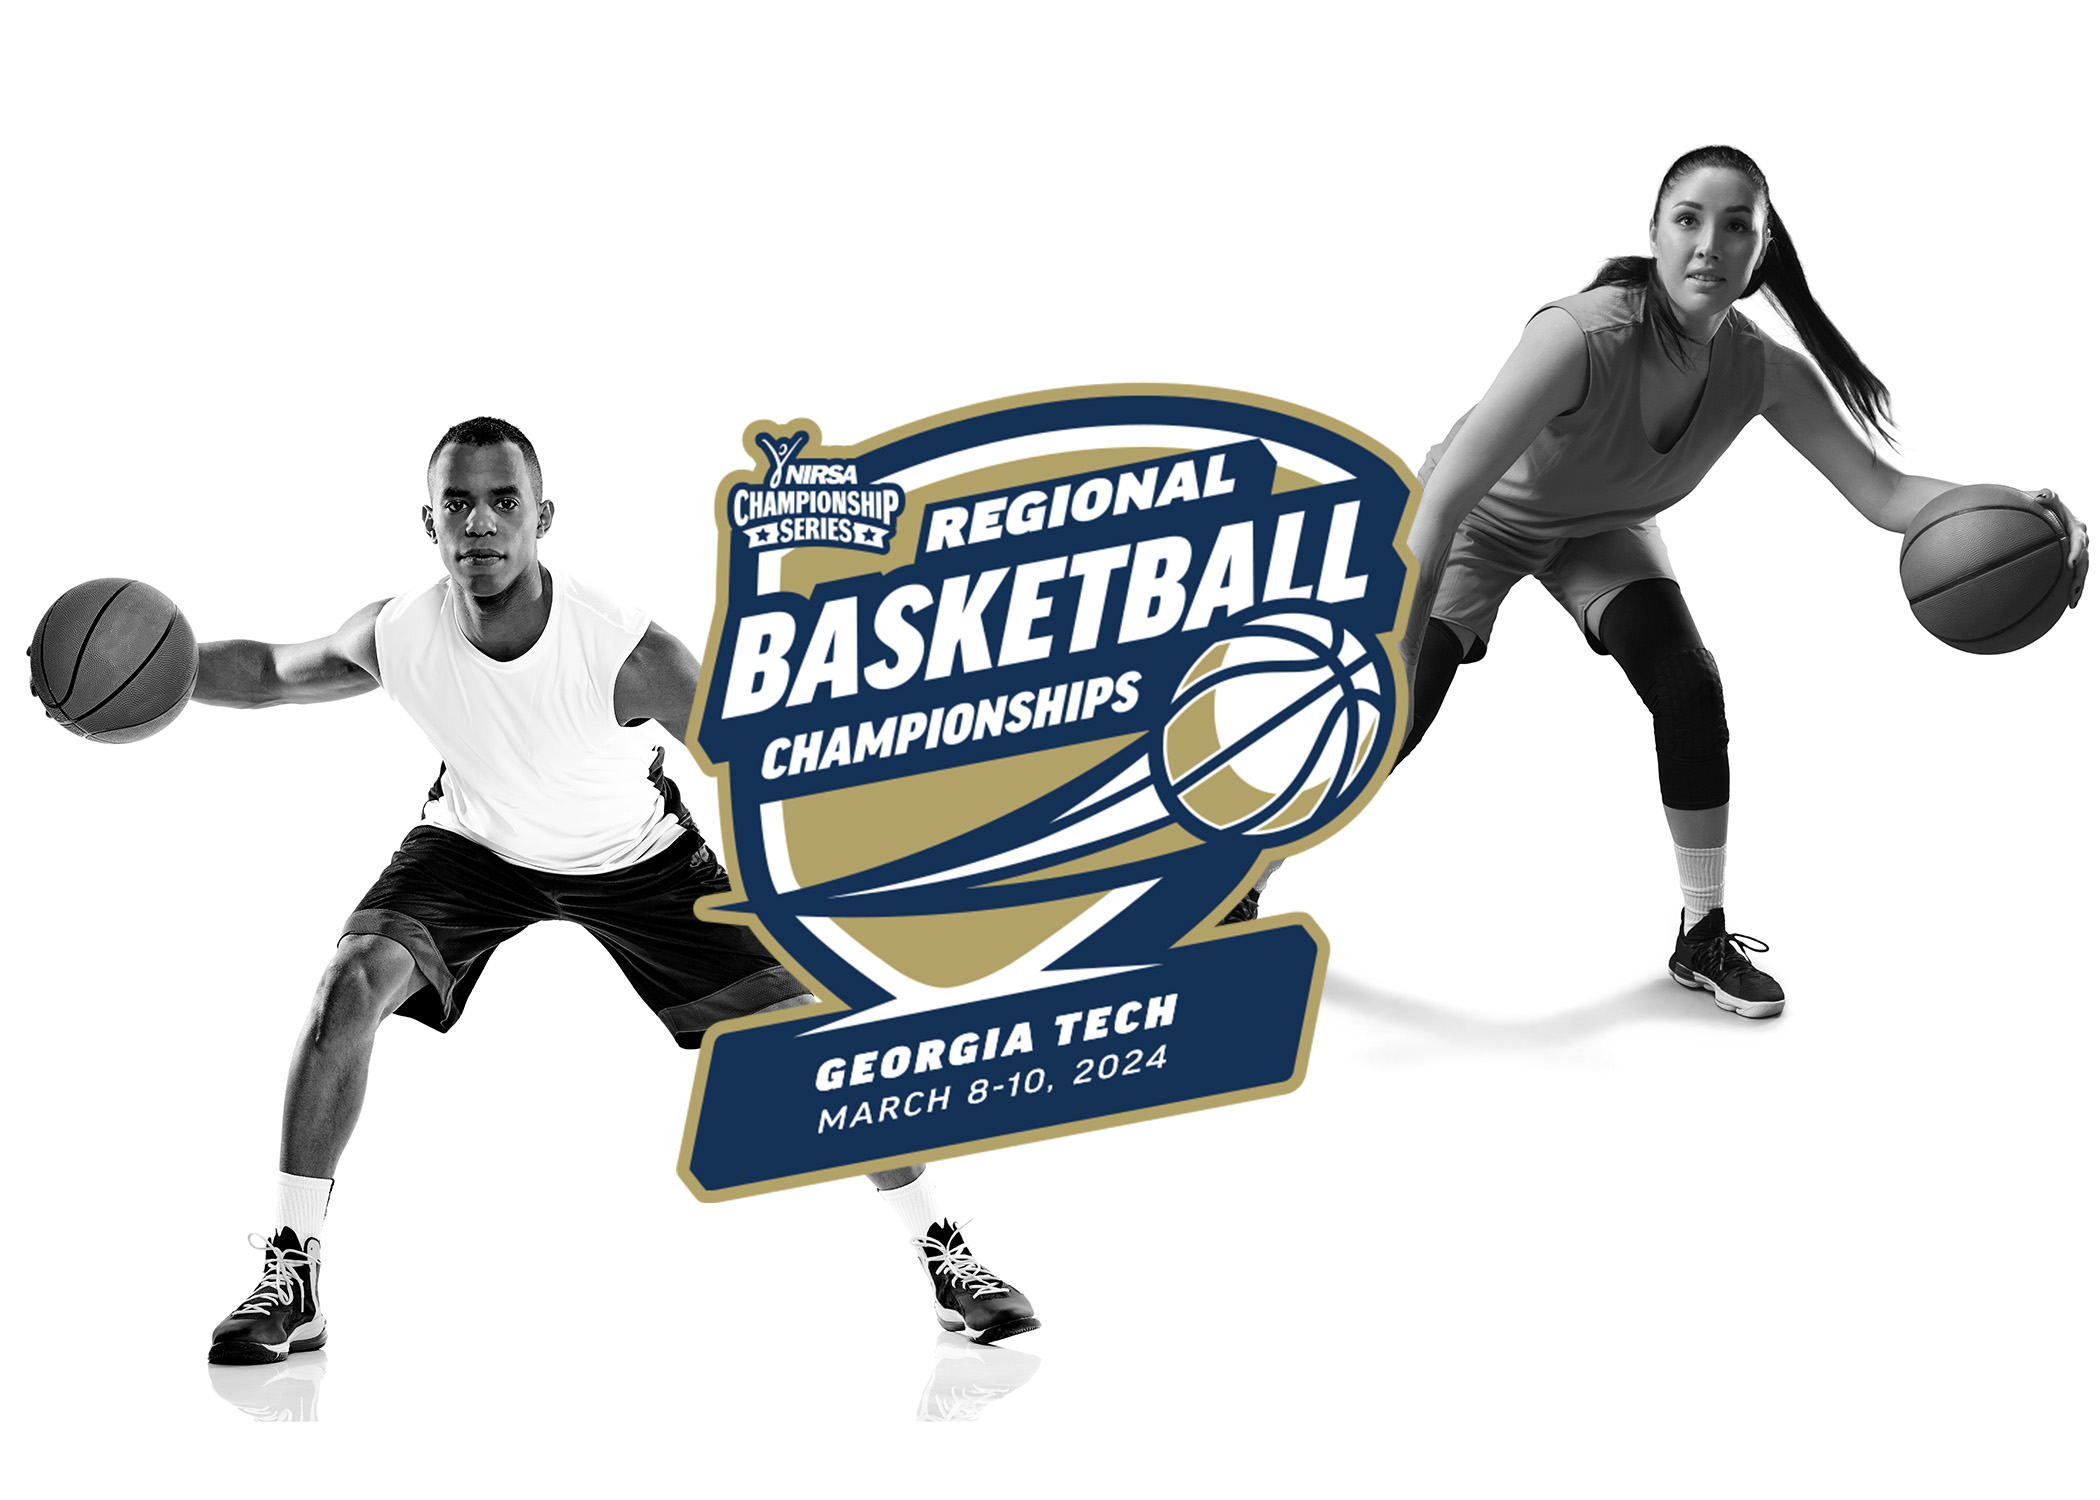 One male and one female basketball player behind the NIRSA tournament logo